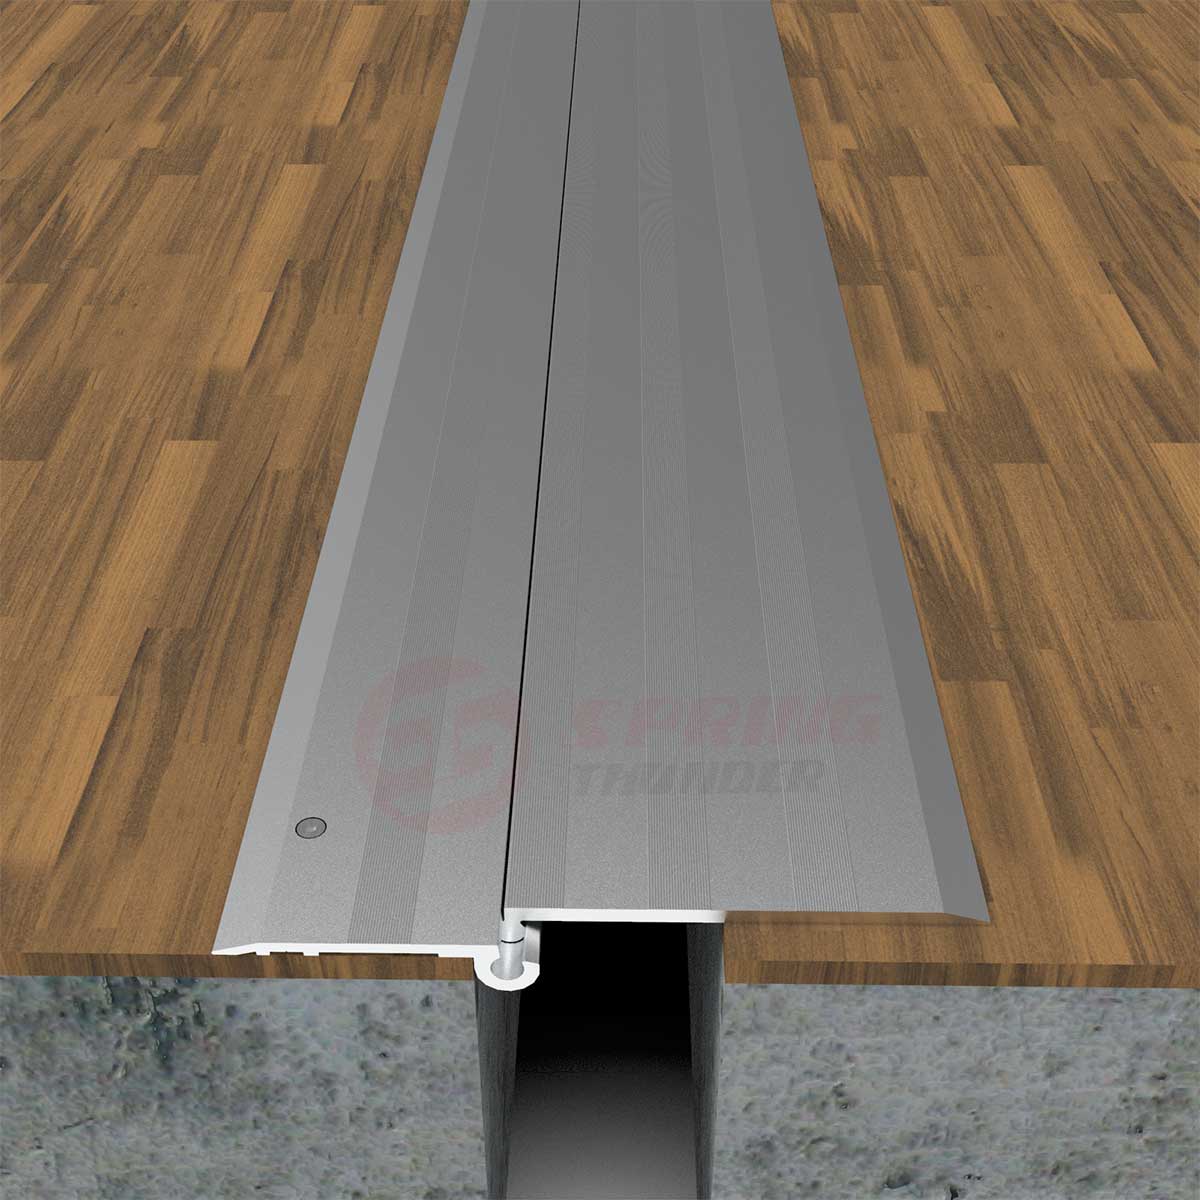 Single Hinged Aluminum Floor Expansion Joint Cover Uneven Slab